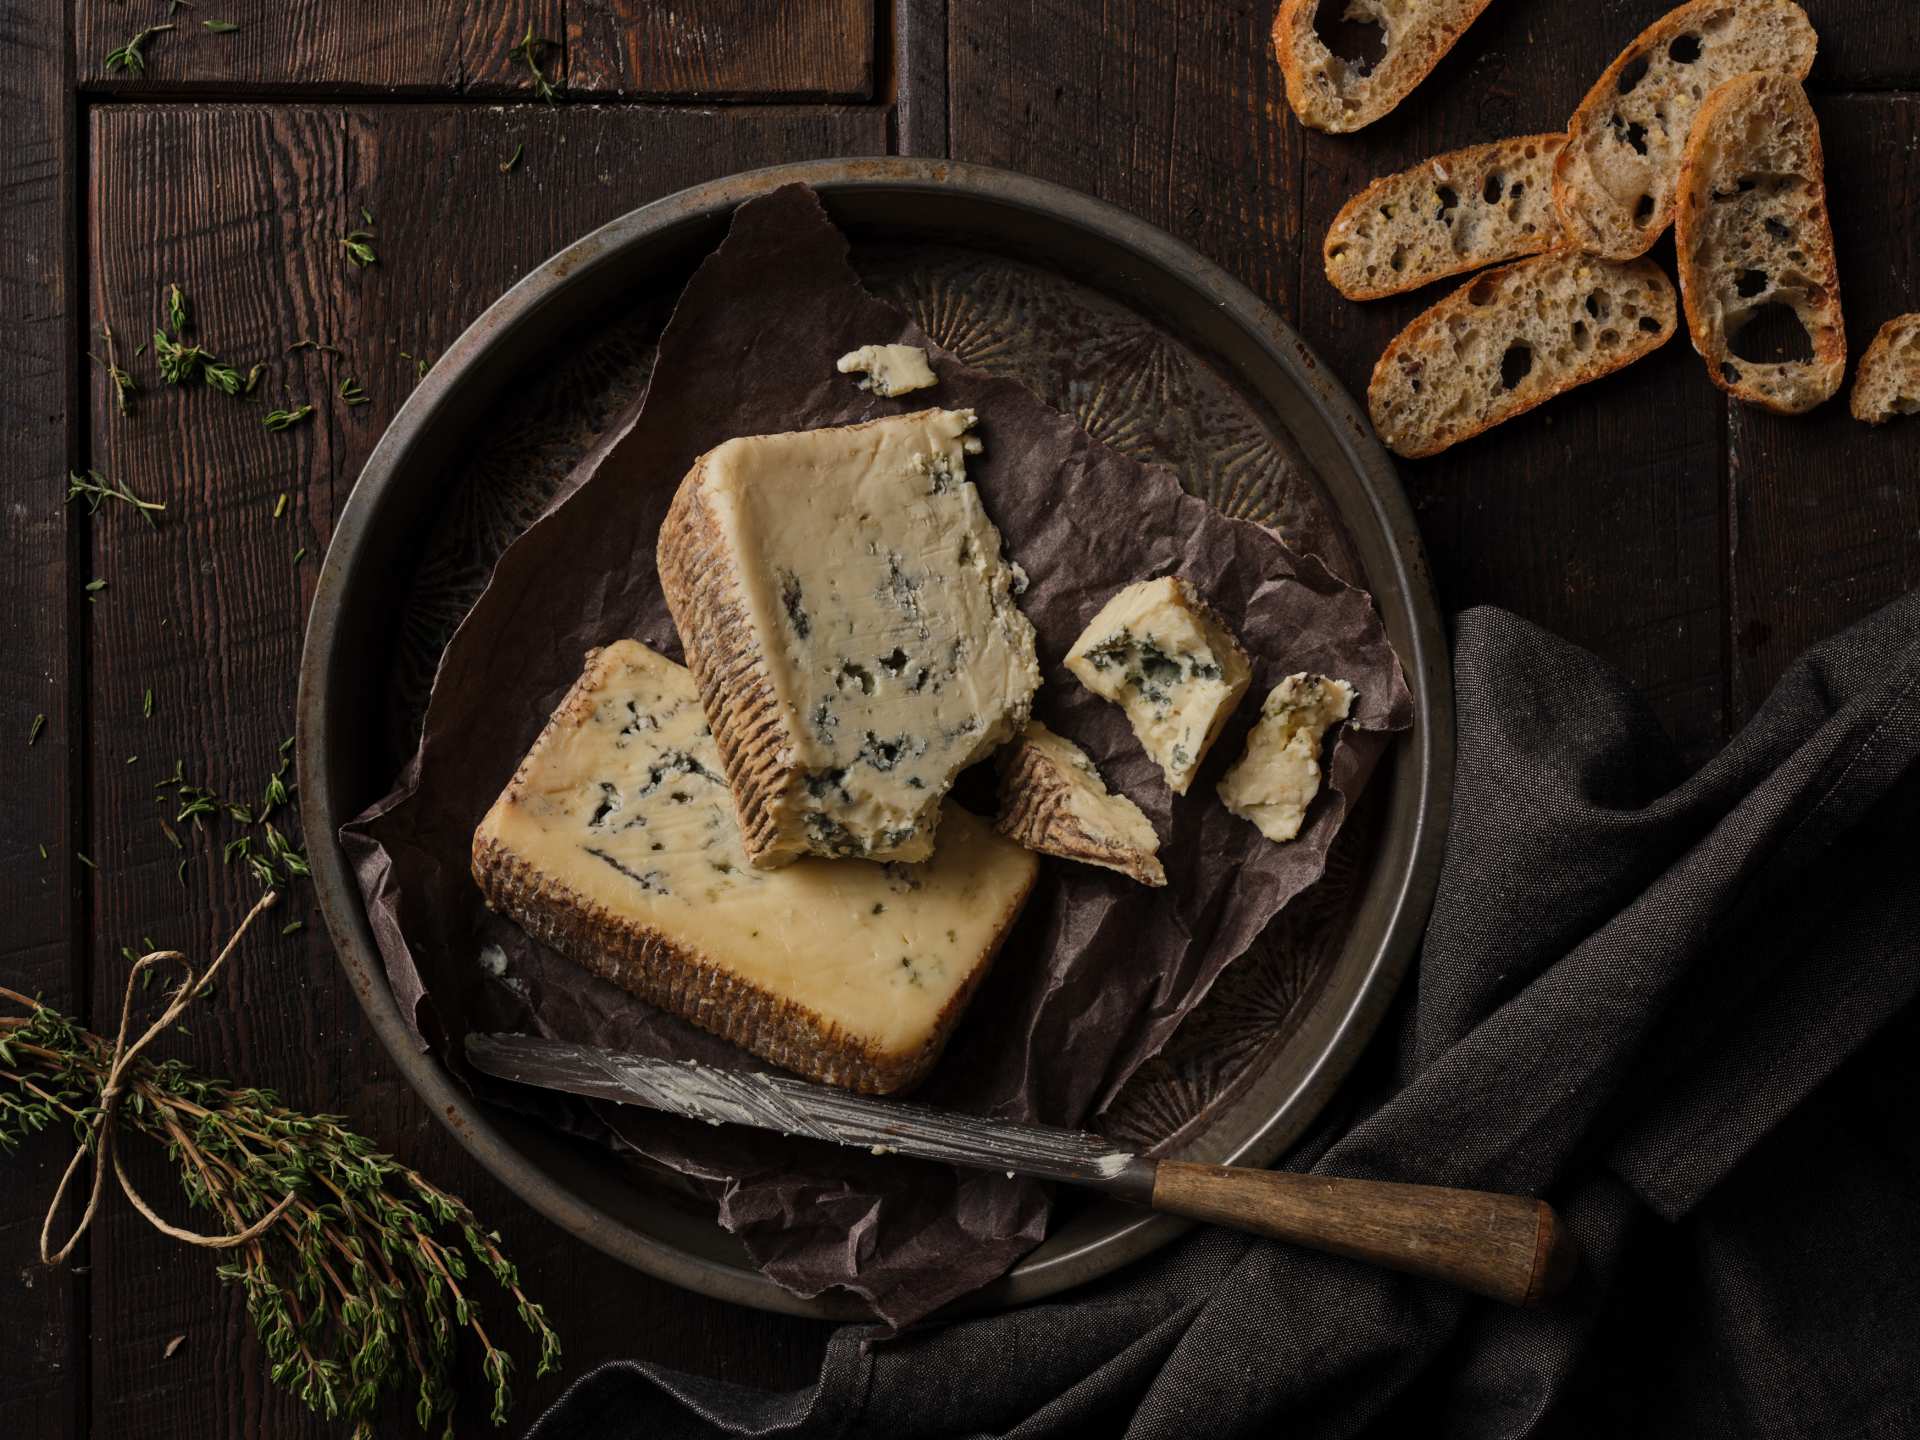 Blue cheese made with Ontario milk